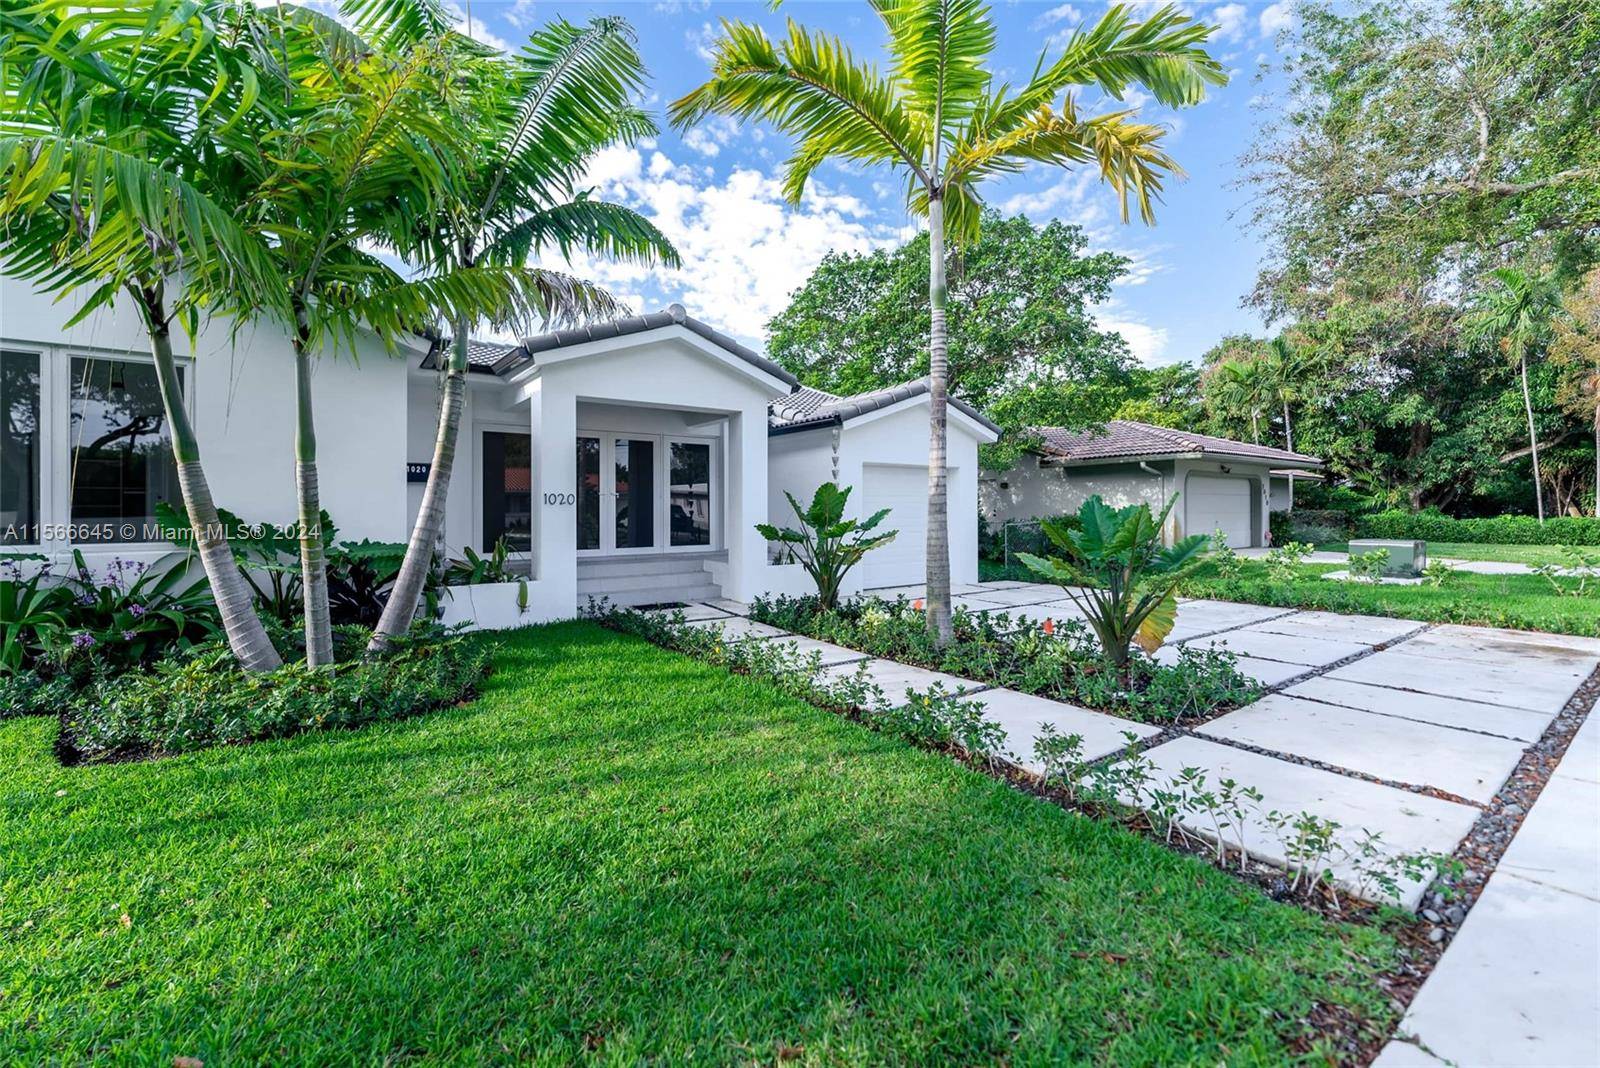 Welcome to this fully renovated beautiful 3 bedroom 3 bathroom home in the desirable Miami Shores.